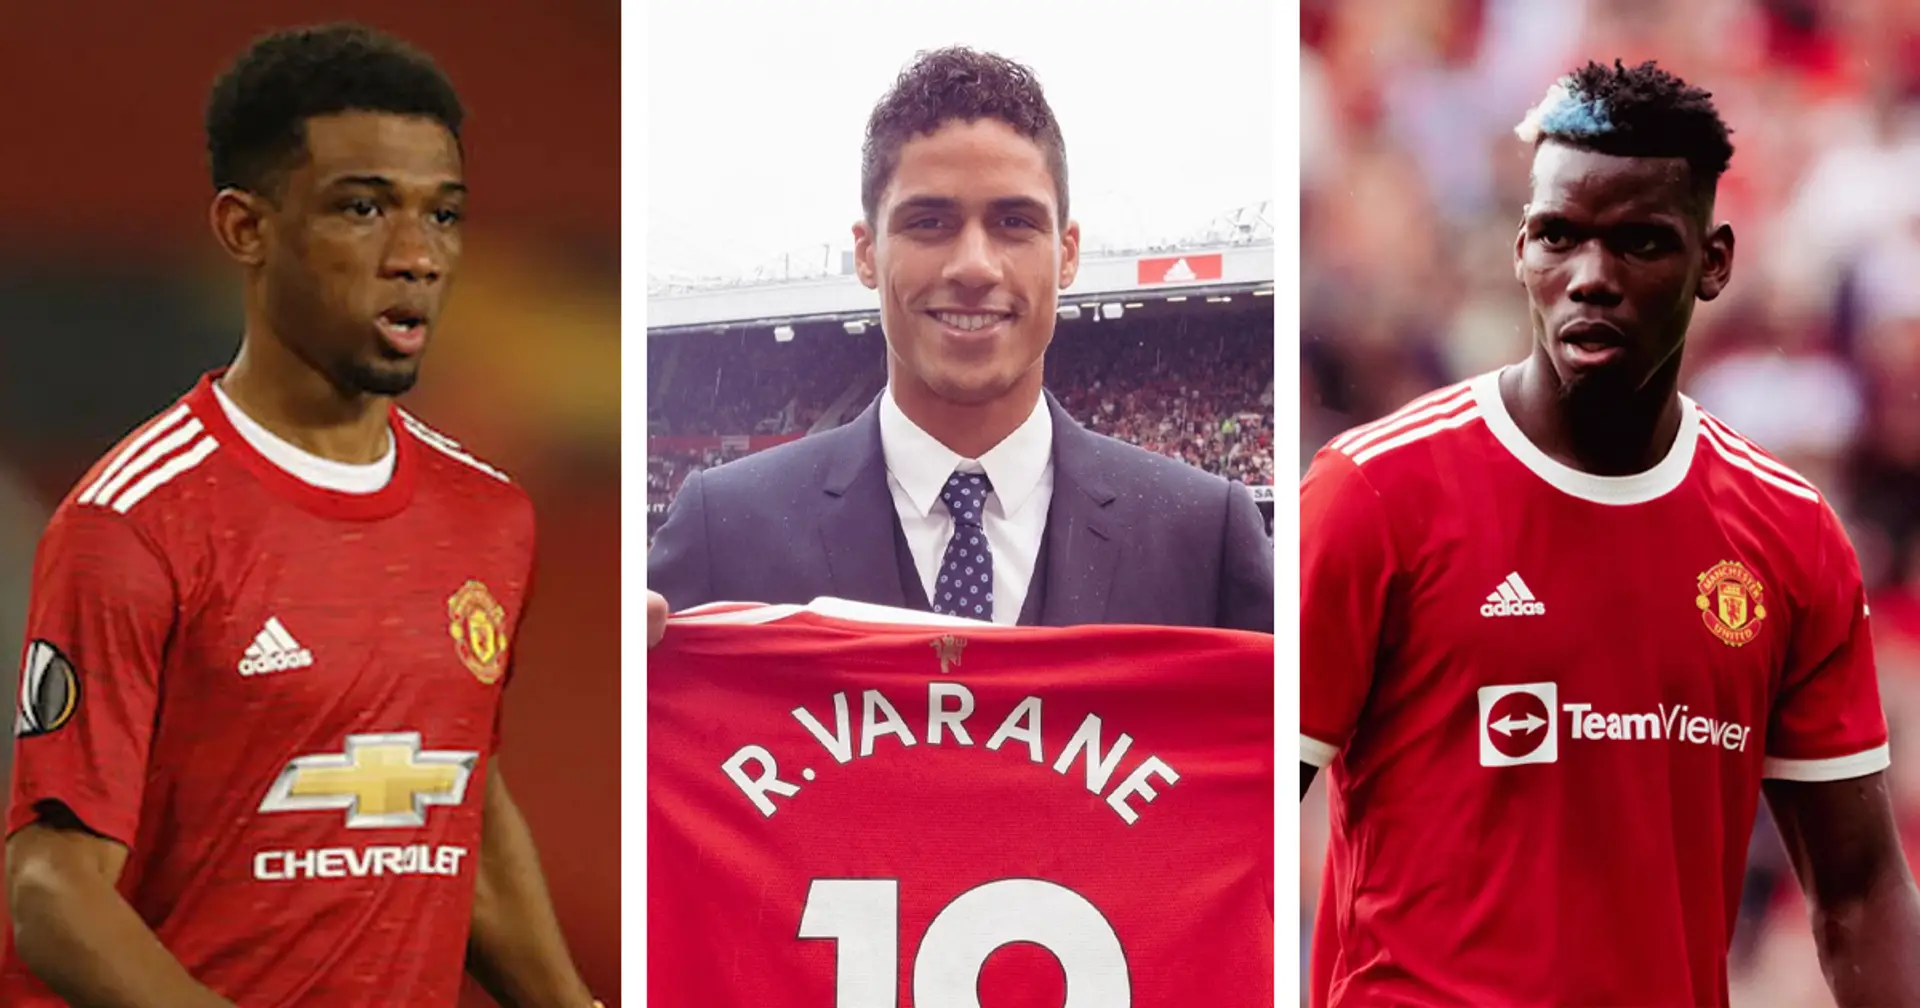 Man United transfers so far: £112.5m spent, 3 potential ins, 6 potential outs with probability ratings